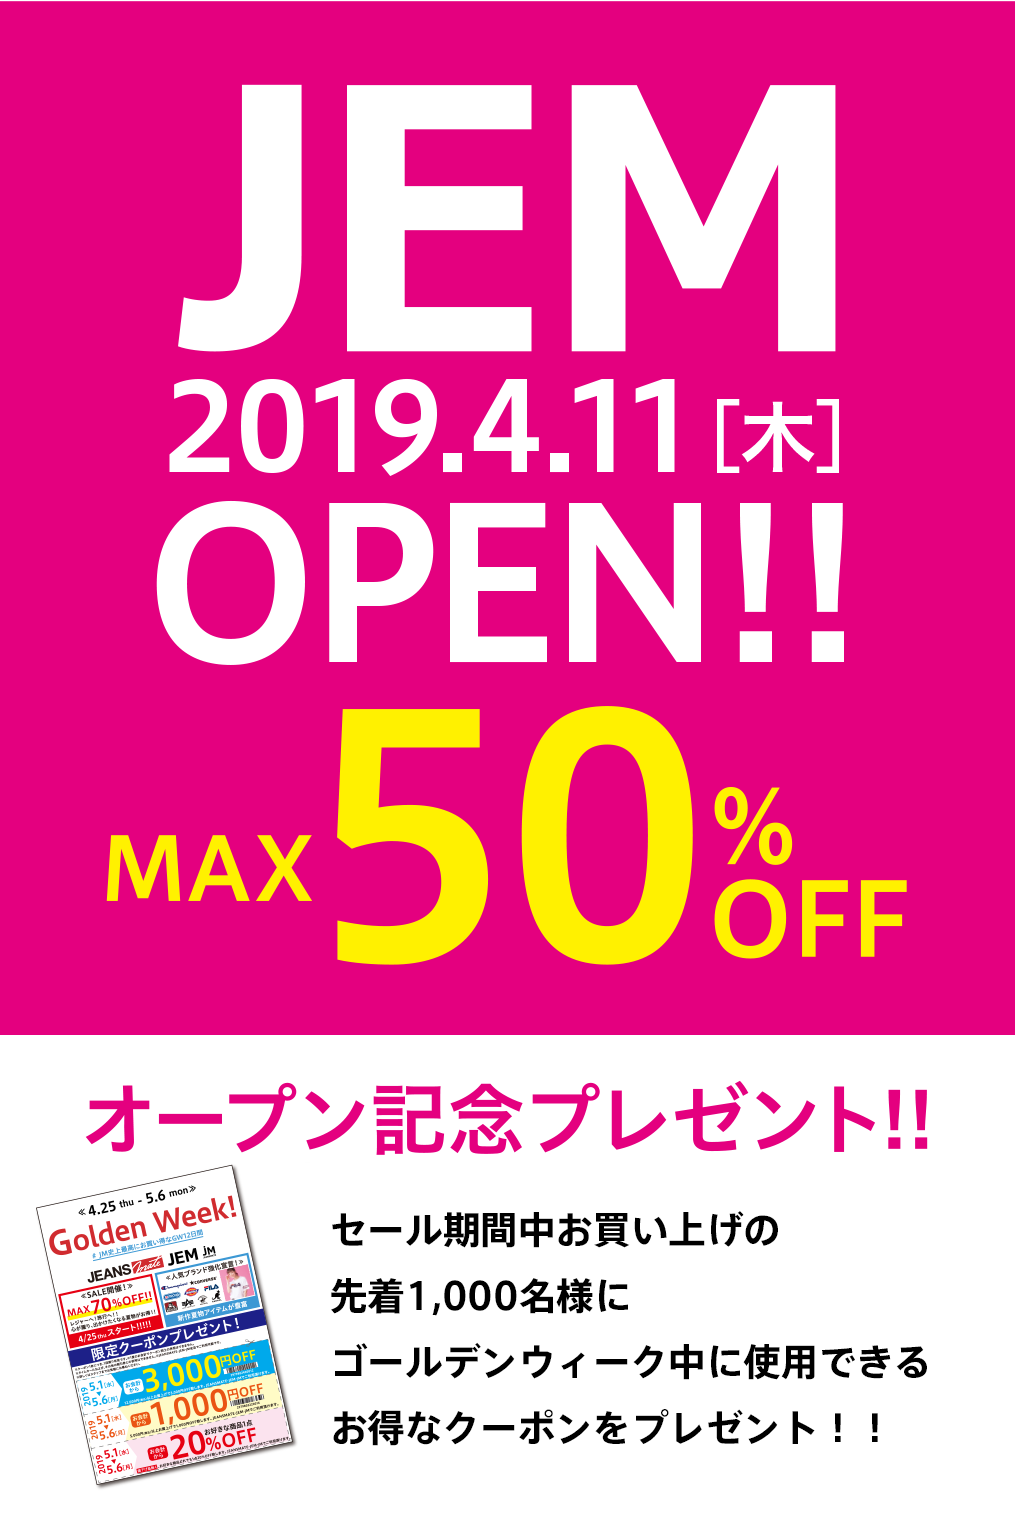 OPEN MAX 50%OFF オープン記念プレゼント！